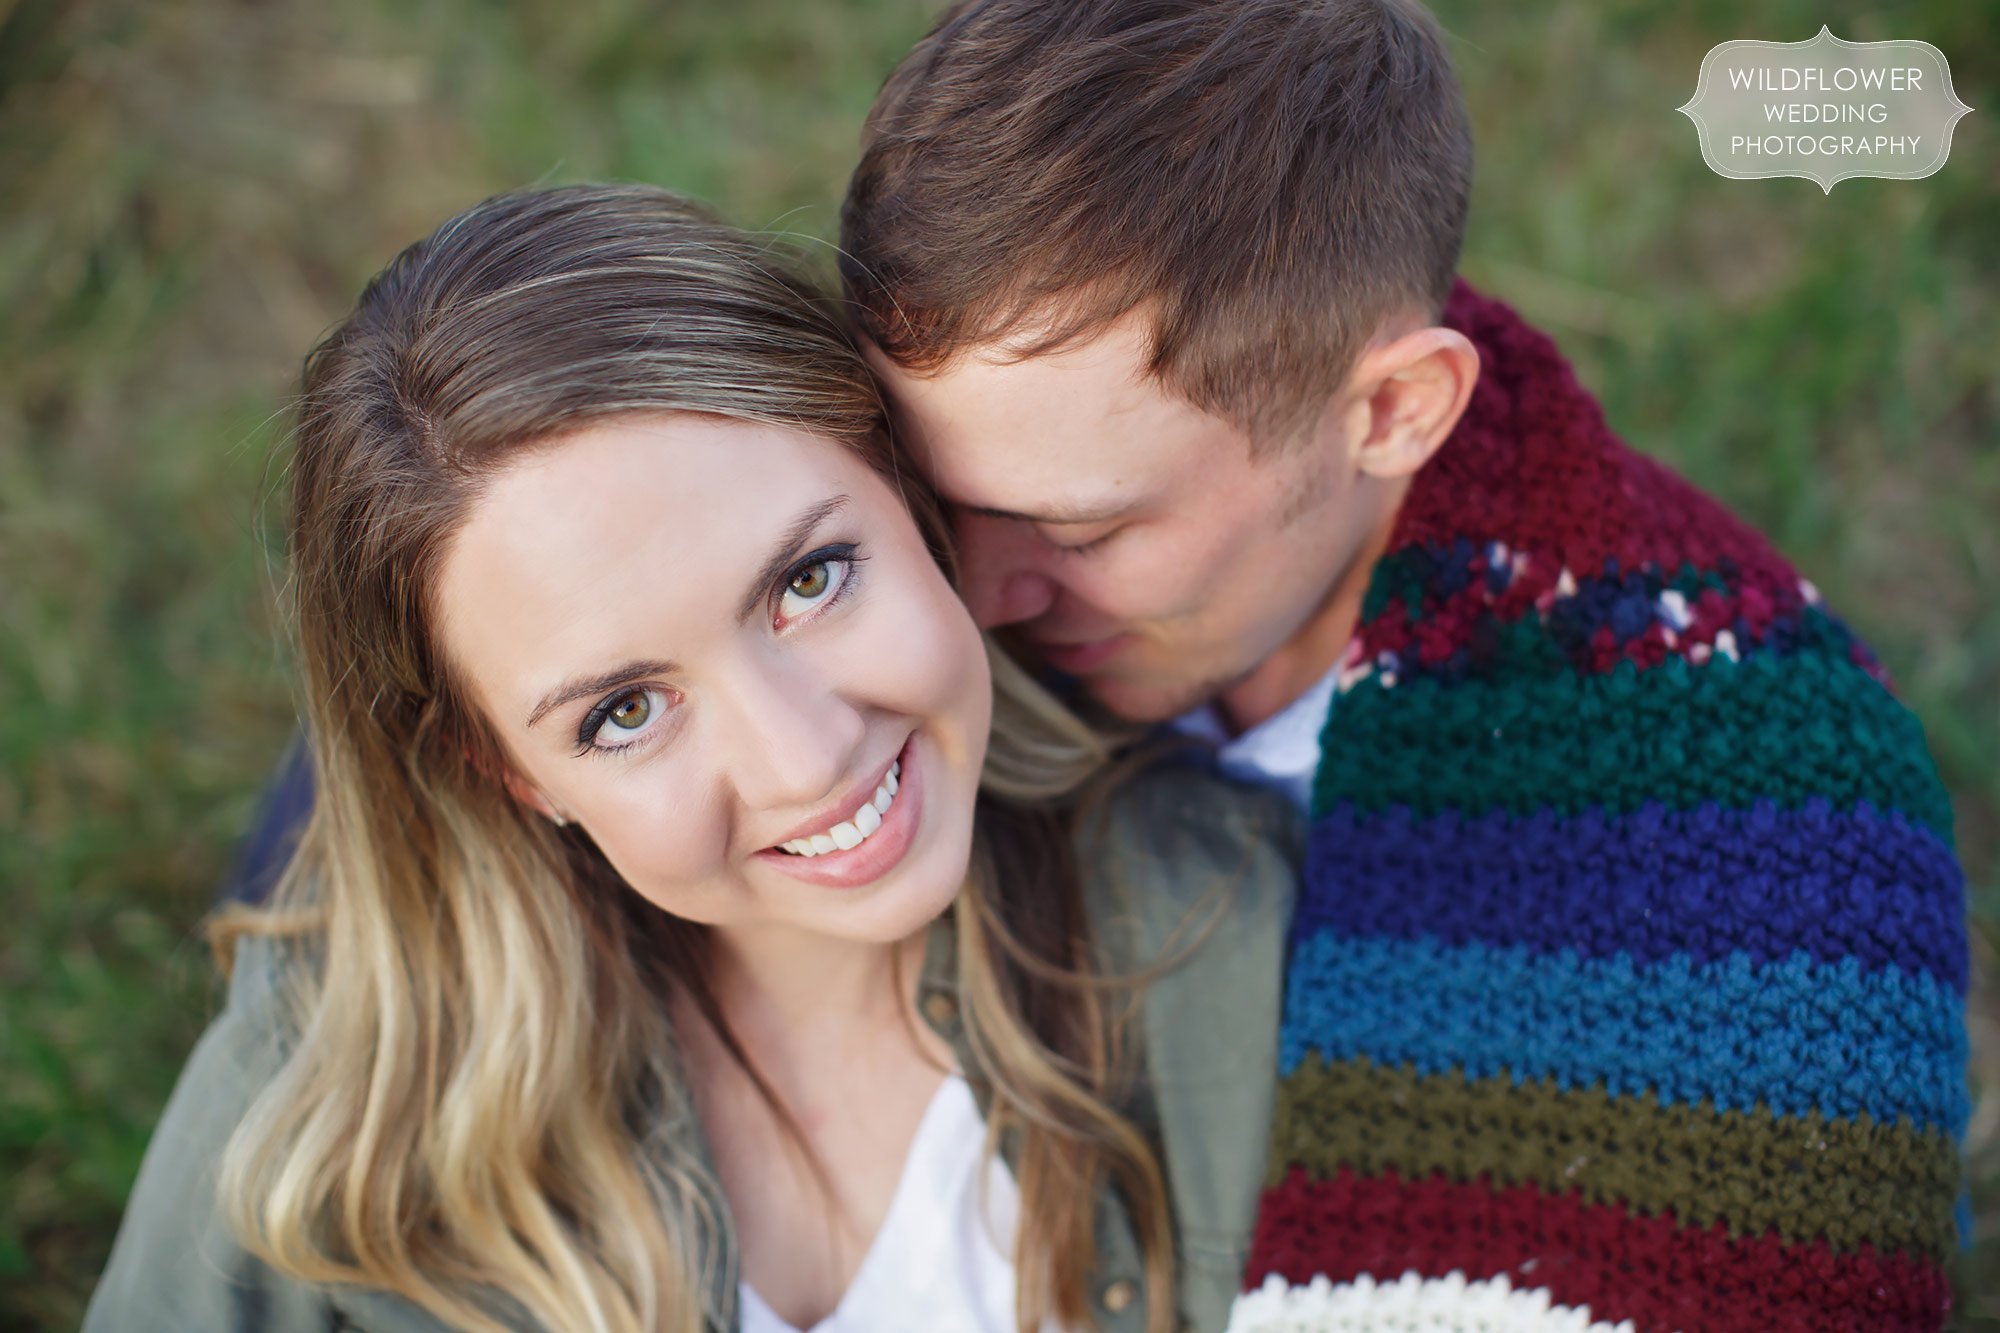 Anthropologie style winter engagement photo session with blanket and girl looking up at camera.